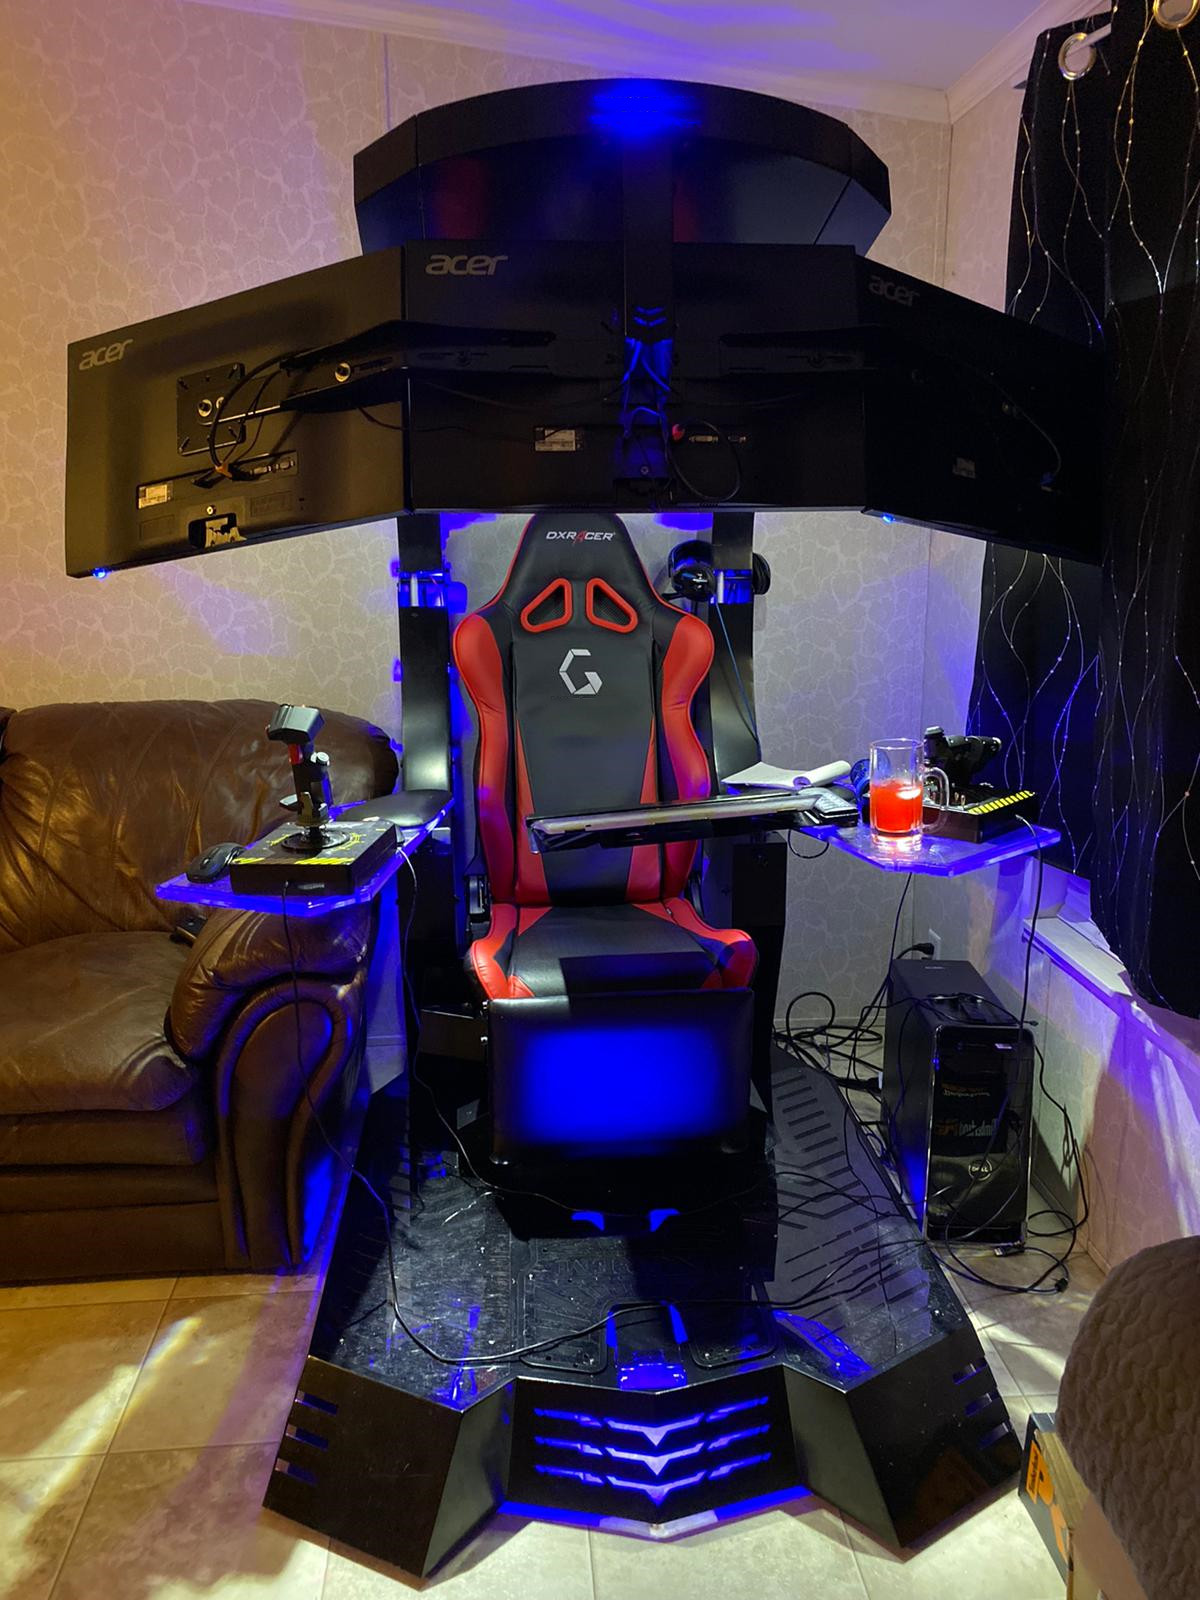 J20 INGREM Veryon PC Chair recliner Workstation Gaming cockpit since 2015 Dual roof arm option with heat and massage cushion support 3 screens